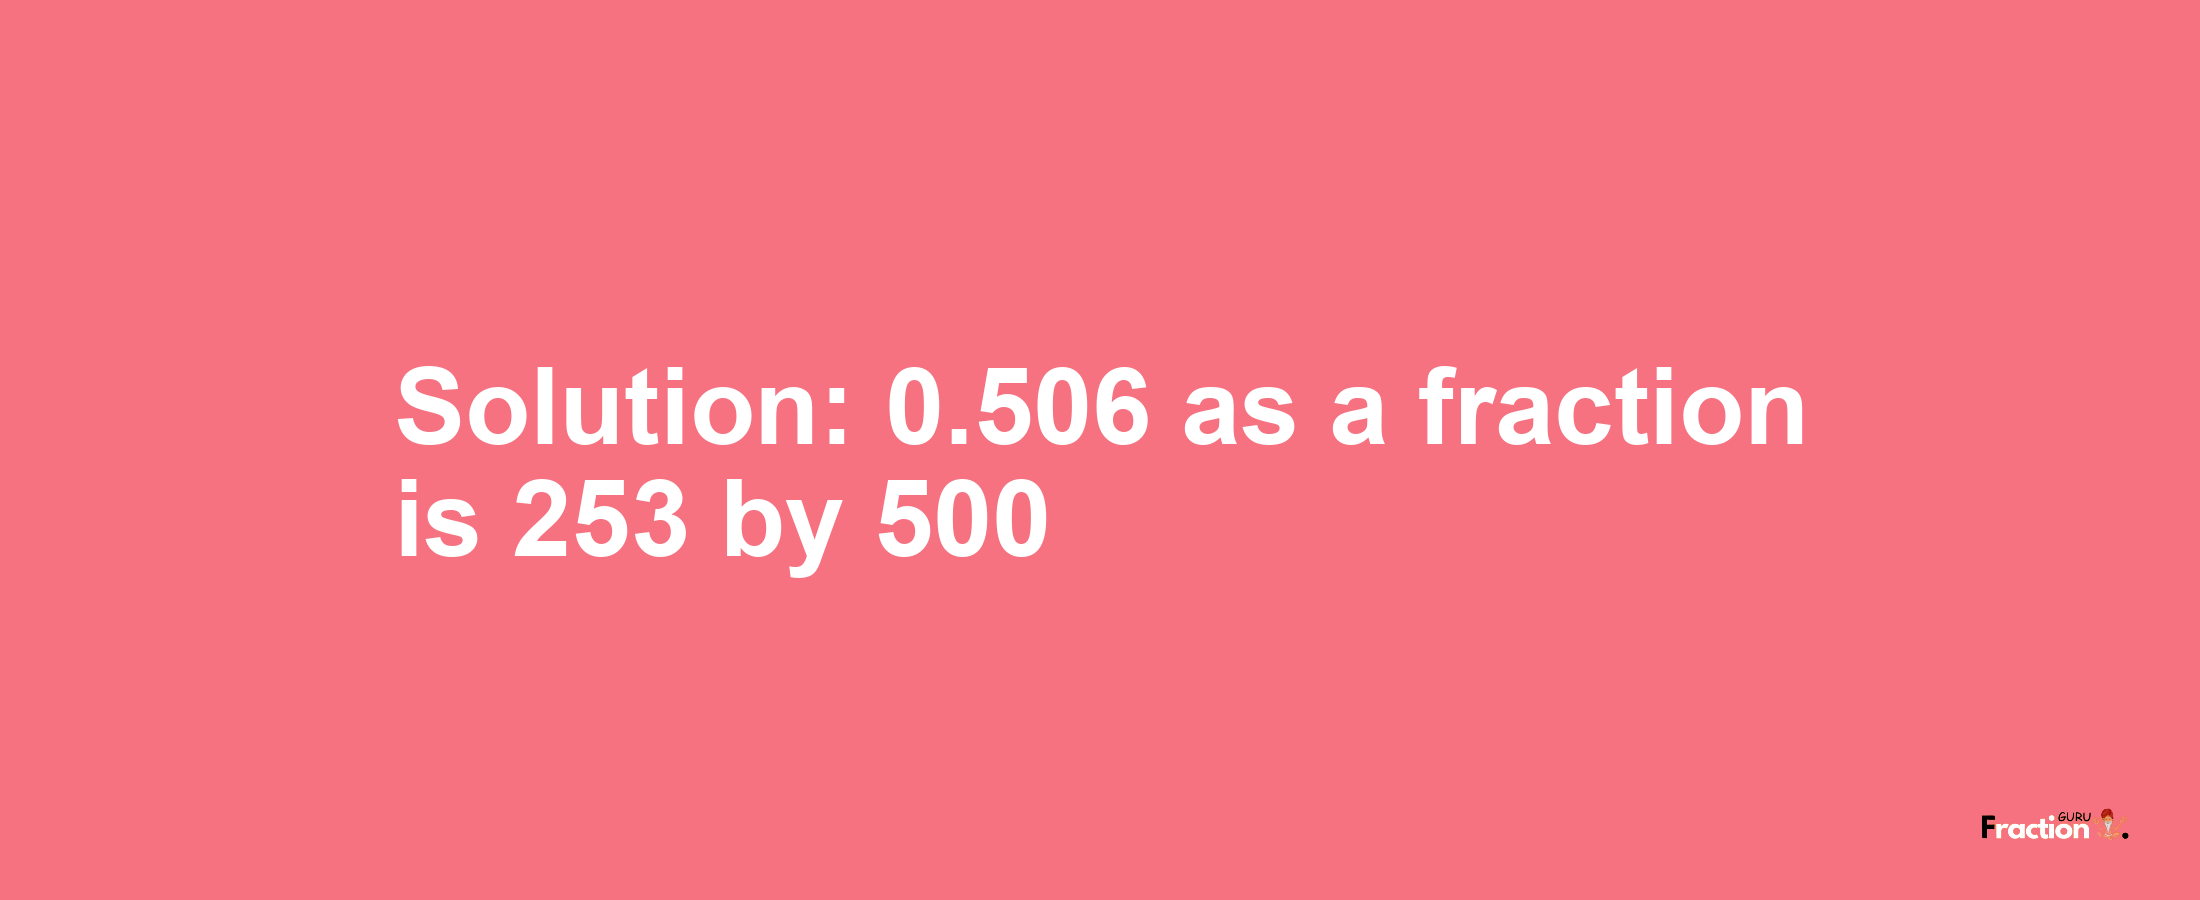 Solution:0.506 as a fraction is 253/500